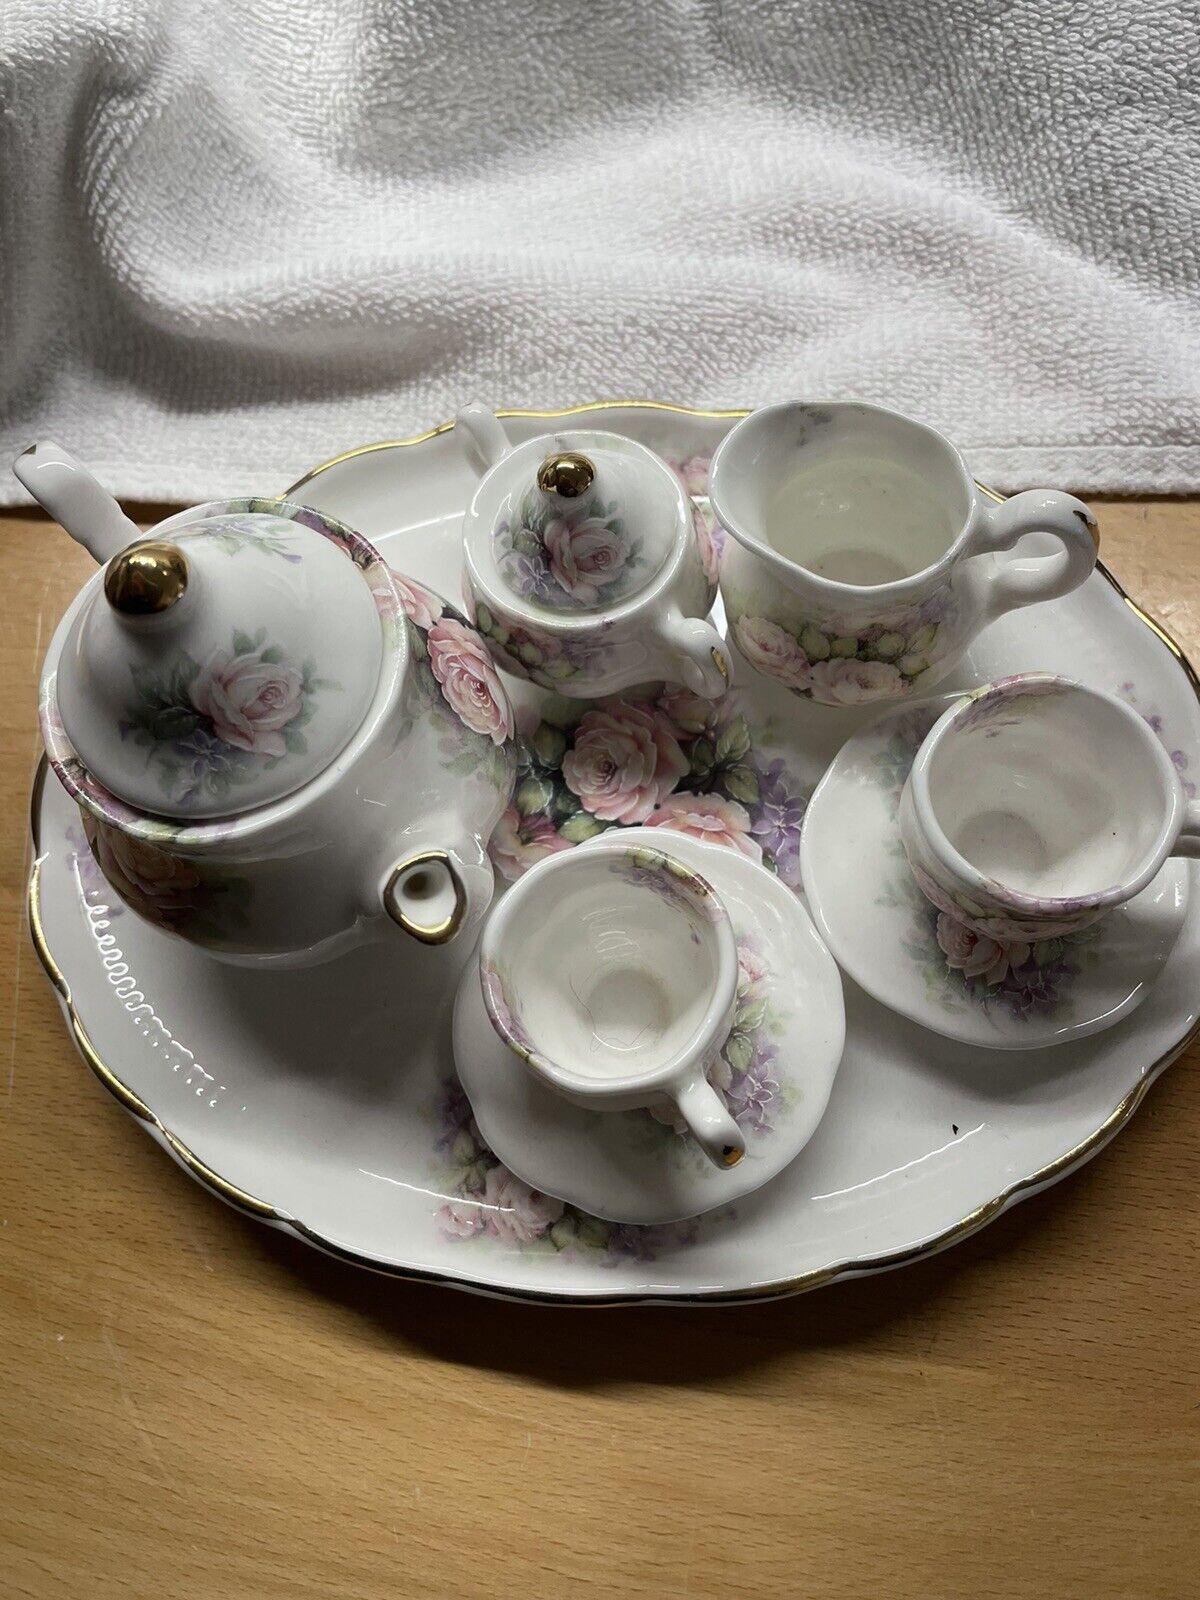 Miniture Tea Set Roses With Gold Trim 10 Piece with extra tray. Chinacraft